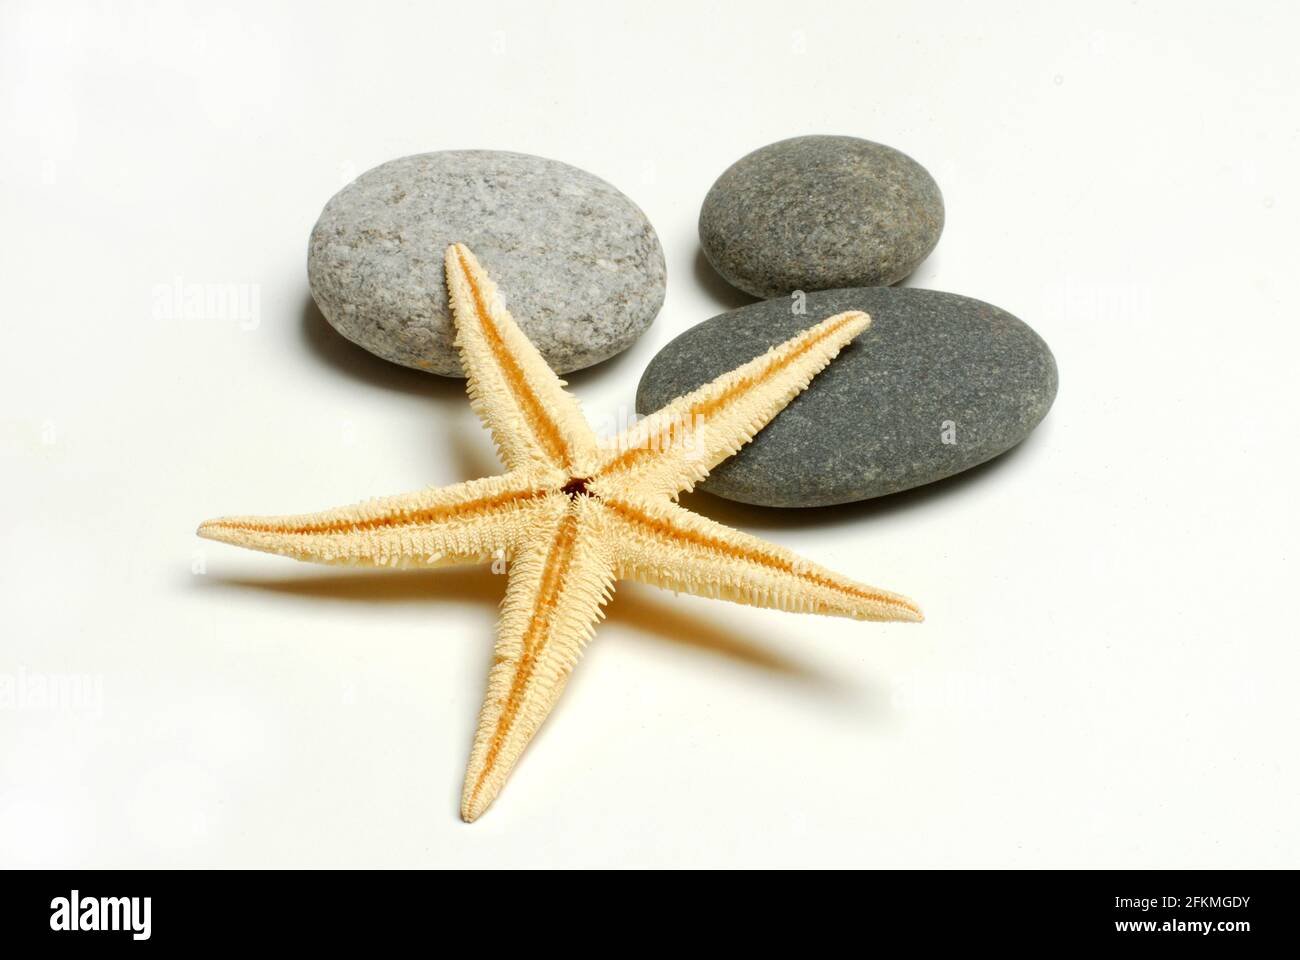 Dried starfish and stones, cut-out, object Stock Photo